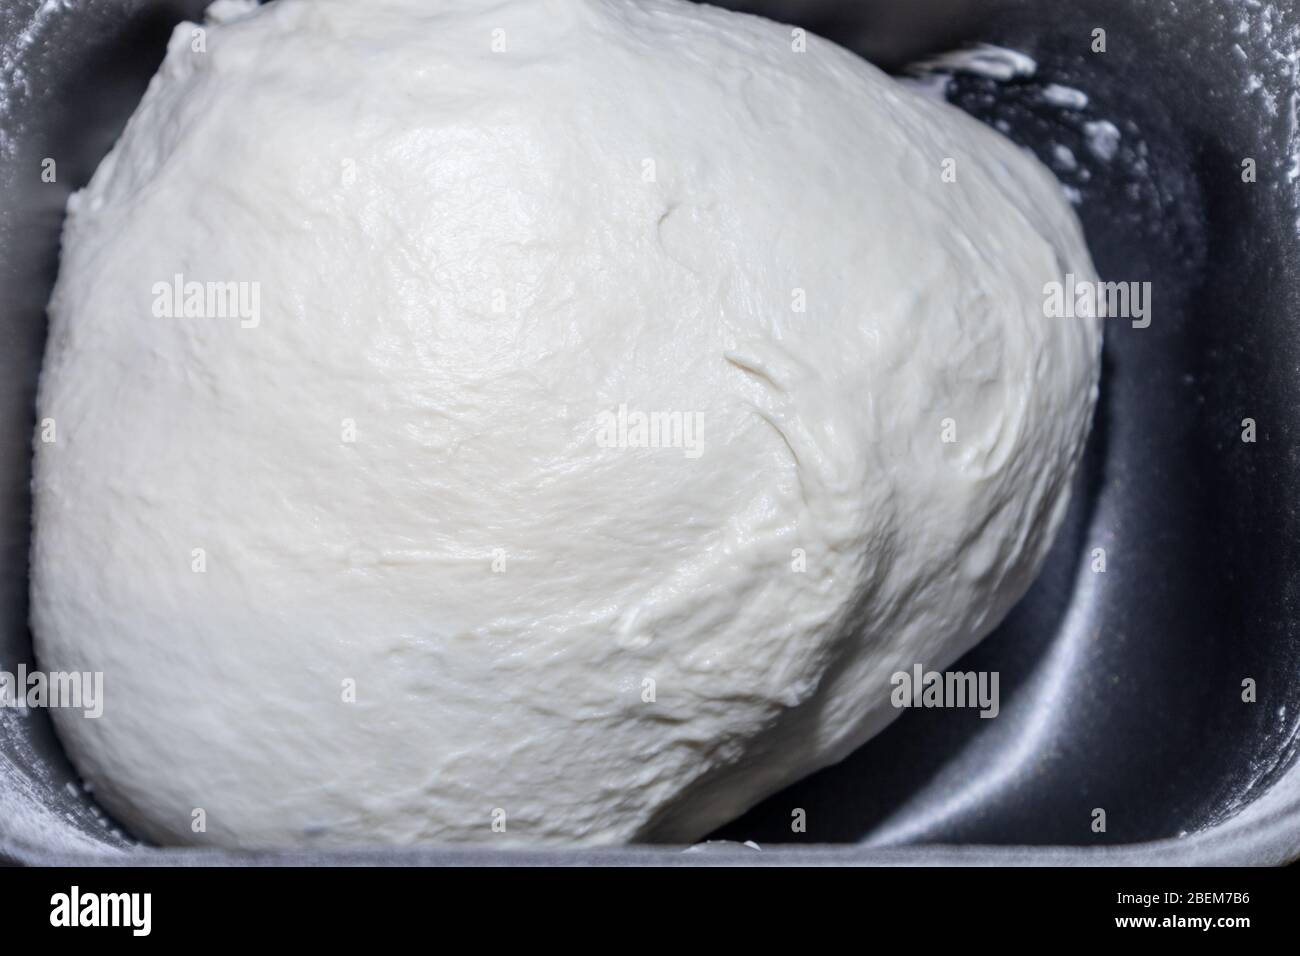 Bread dough in breadmaker machine dispenser. Just mixed ready to rise fresh white home made bread pizza pastry duff cooking process close-up Stock Photo